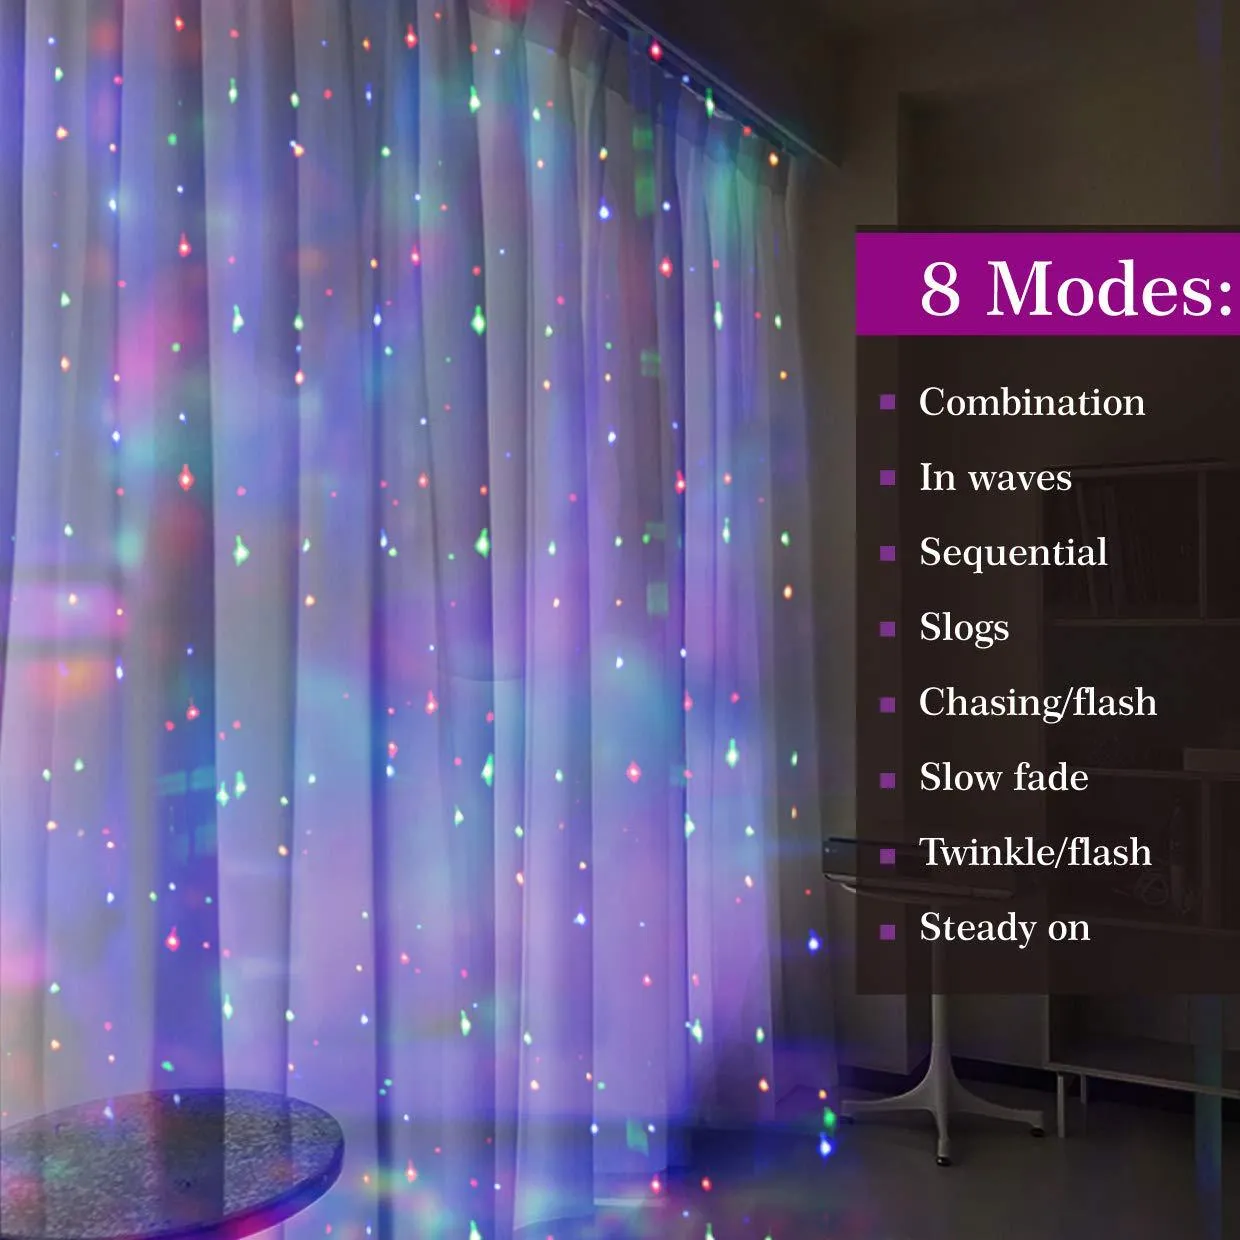 Umlight1688 300 LED Copper Curtain String Lights Window Icicle Lights USB Powered 8 Modes with Wireless Remote Control